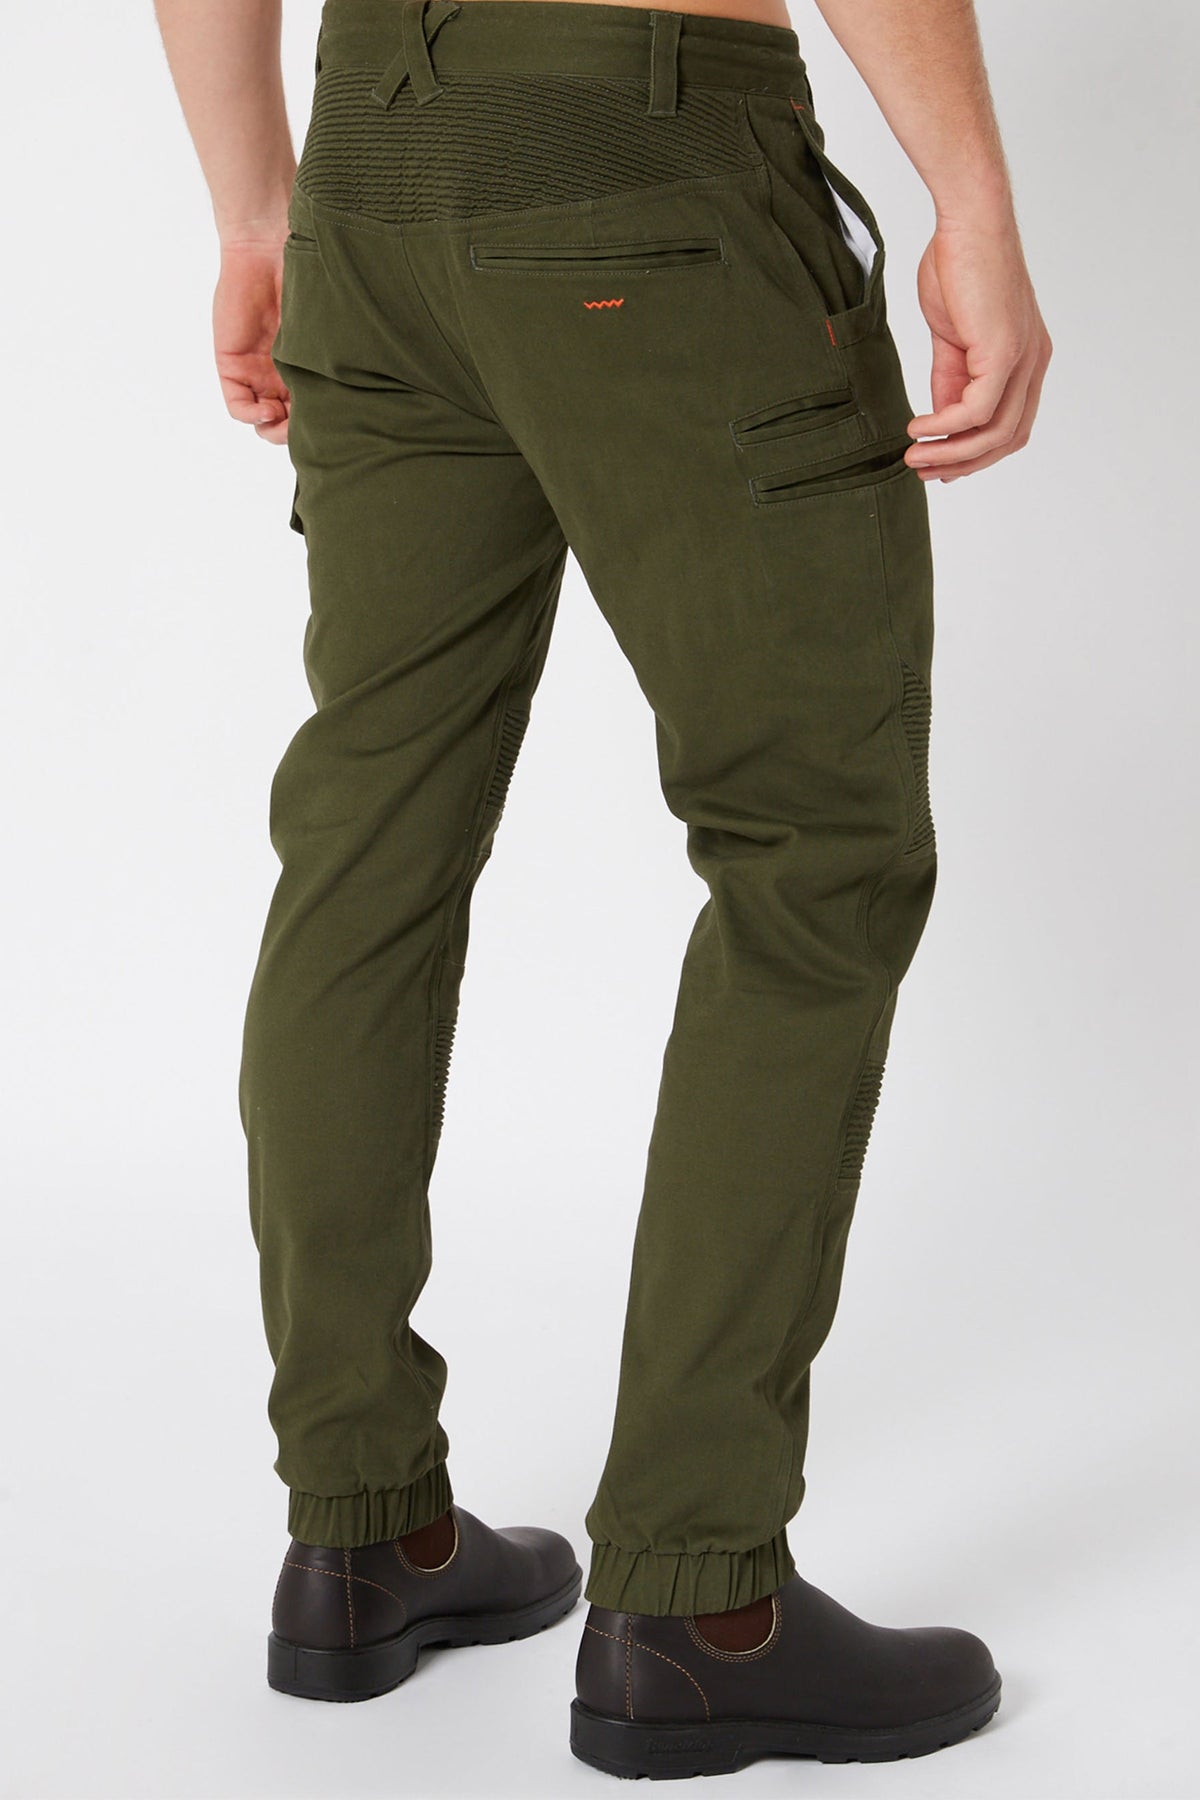 All our valued clients will get a fair price and excellent service from JP  Fueled Corrugated Stretch Pant - Olive WORKWEAR